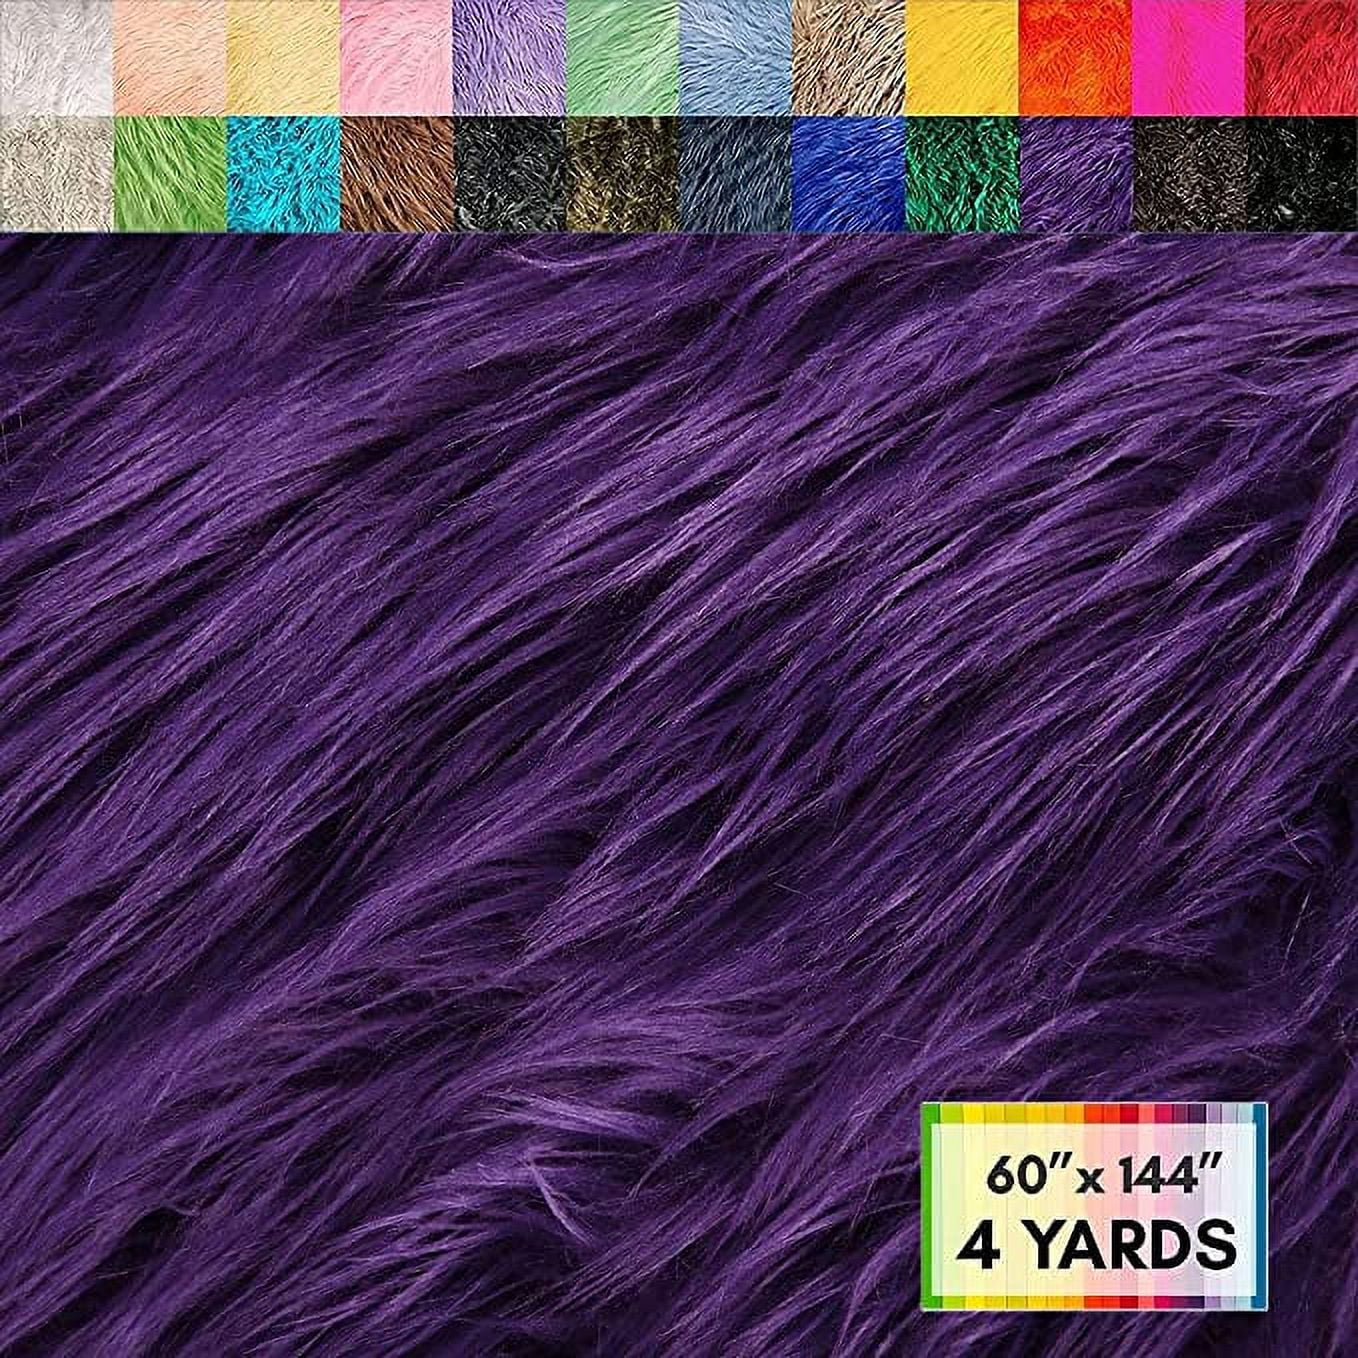 FabricLA Shaggy Faux Fur Fabric by The Yard - 180 x 60 Inches (455 cm x 150 cm) - Craft Furry Fabric for Sewing Apparel, Rugs, P